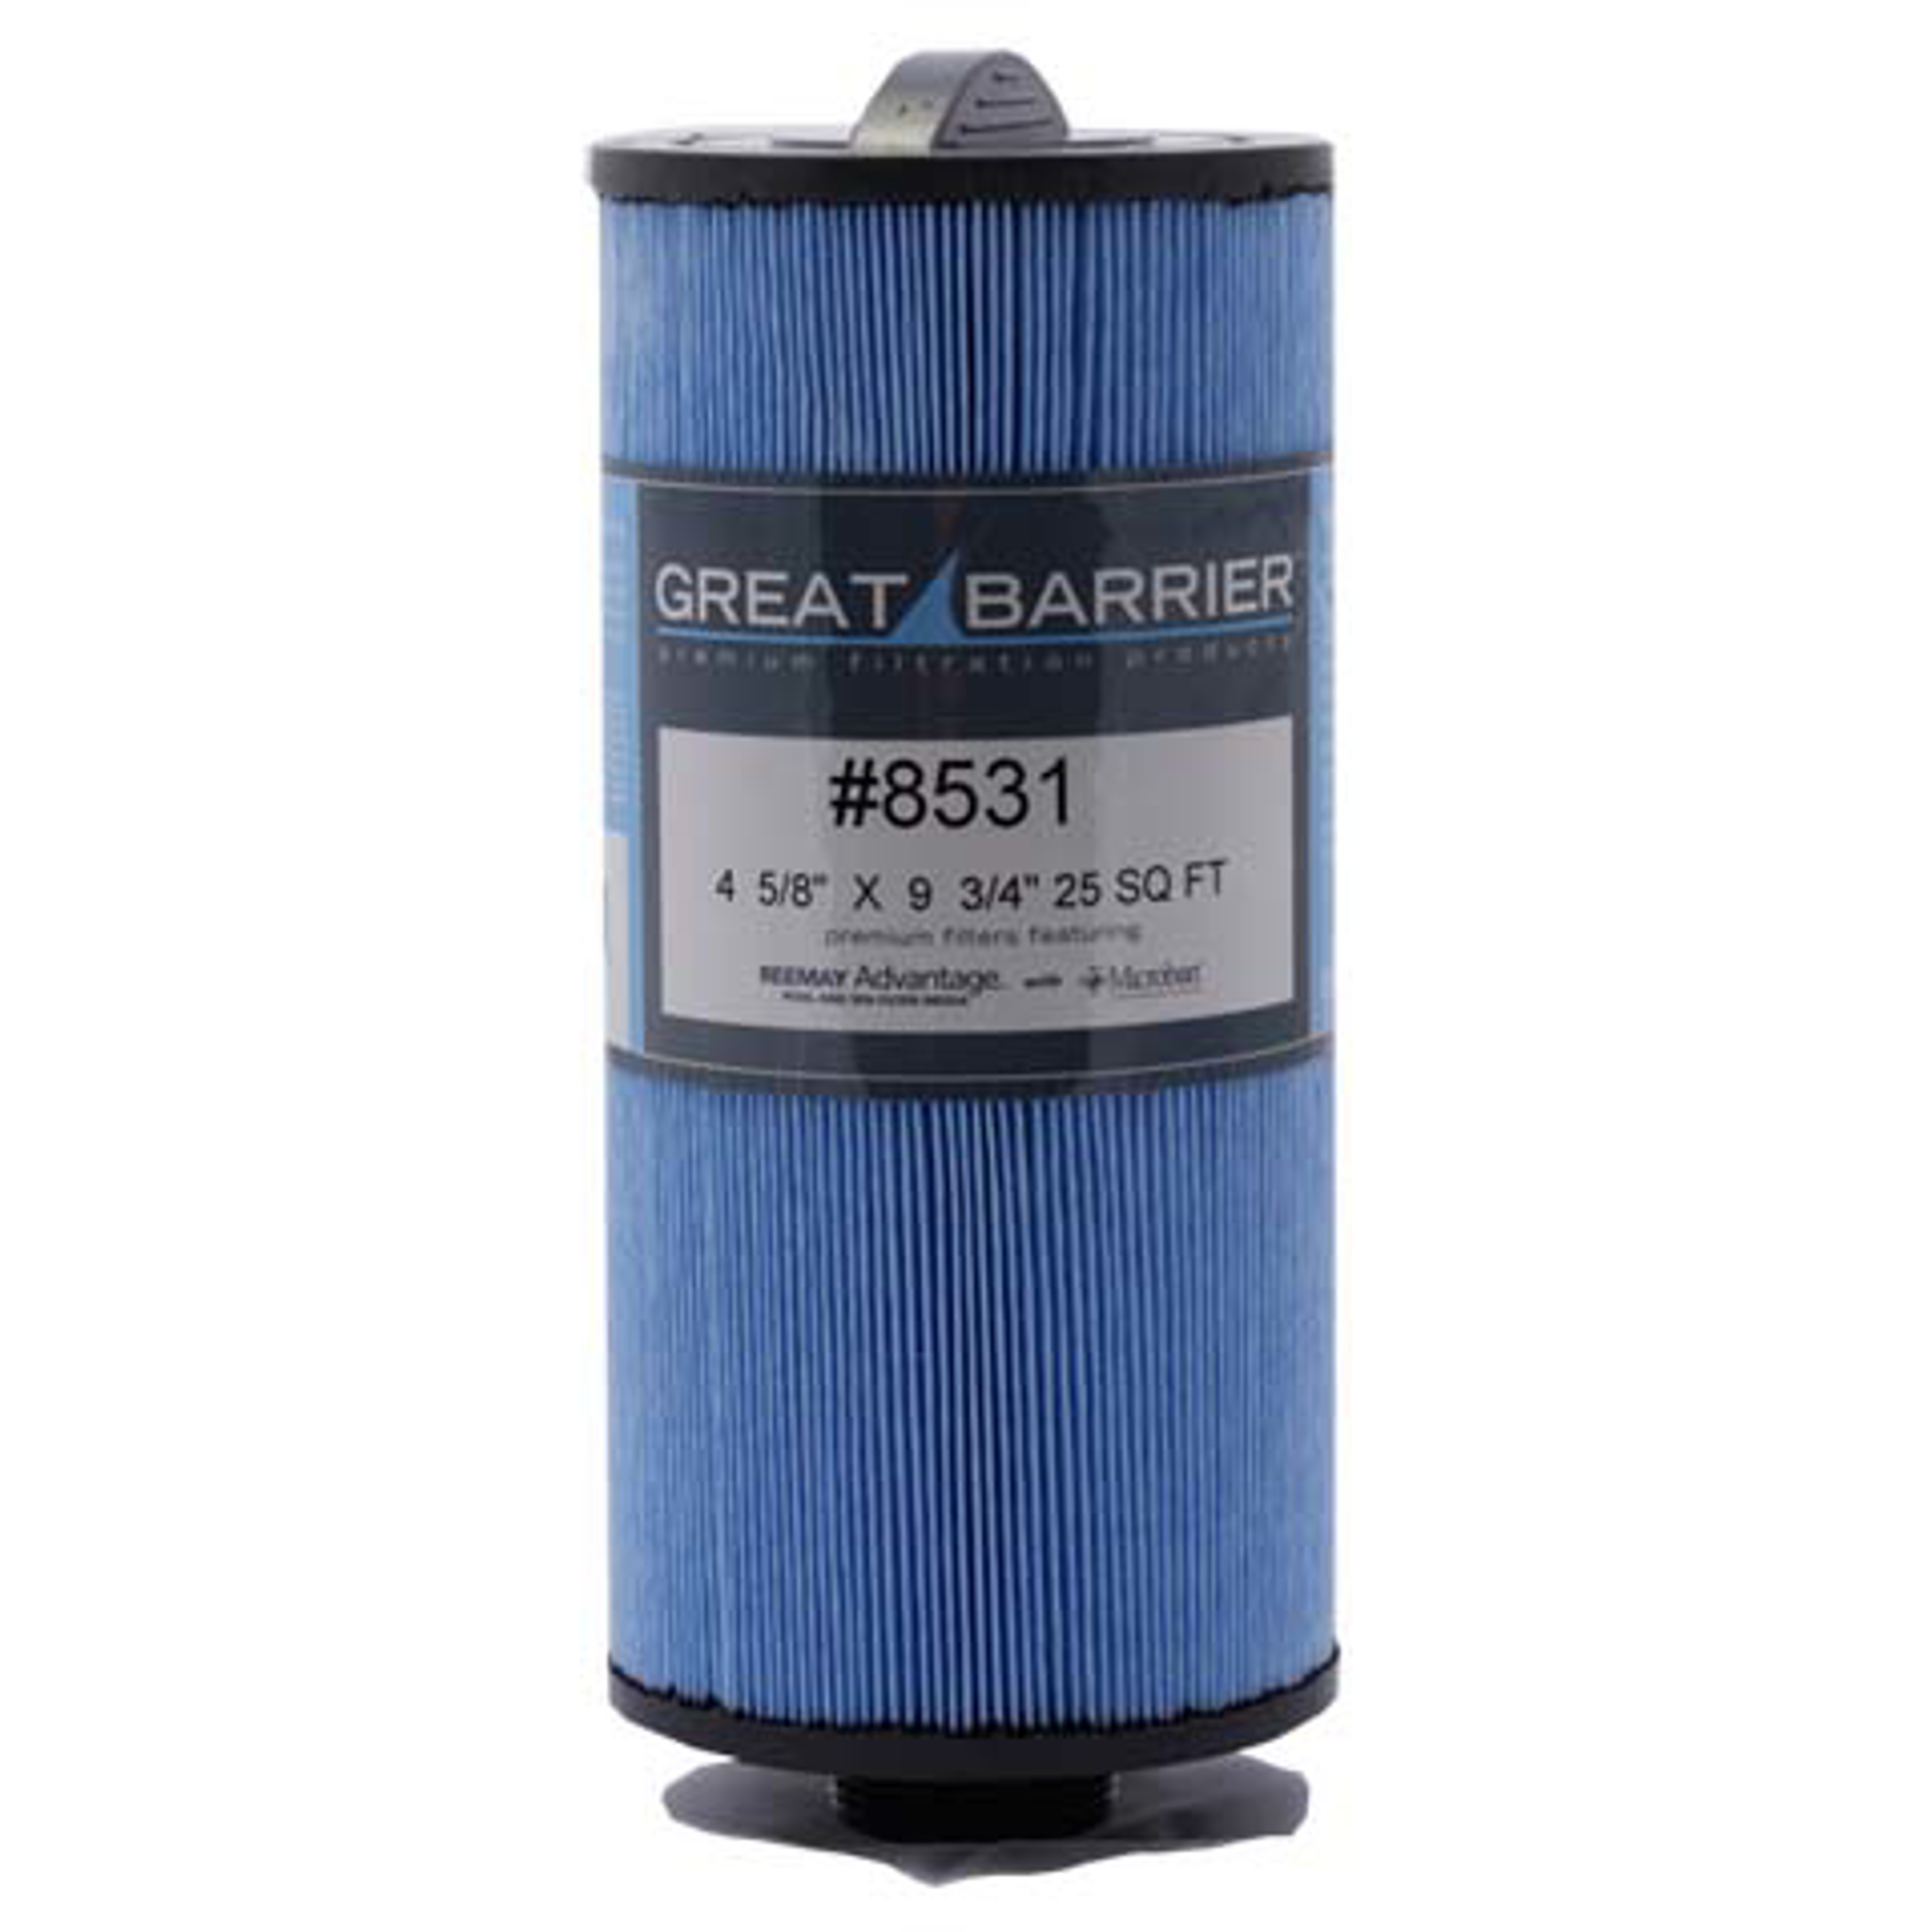 Great Barrier 25sf - Universal Filter